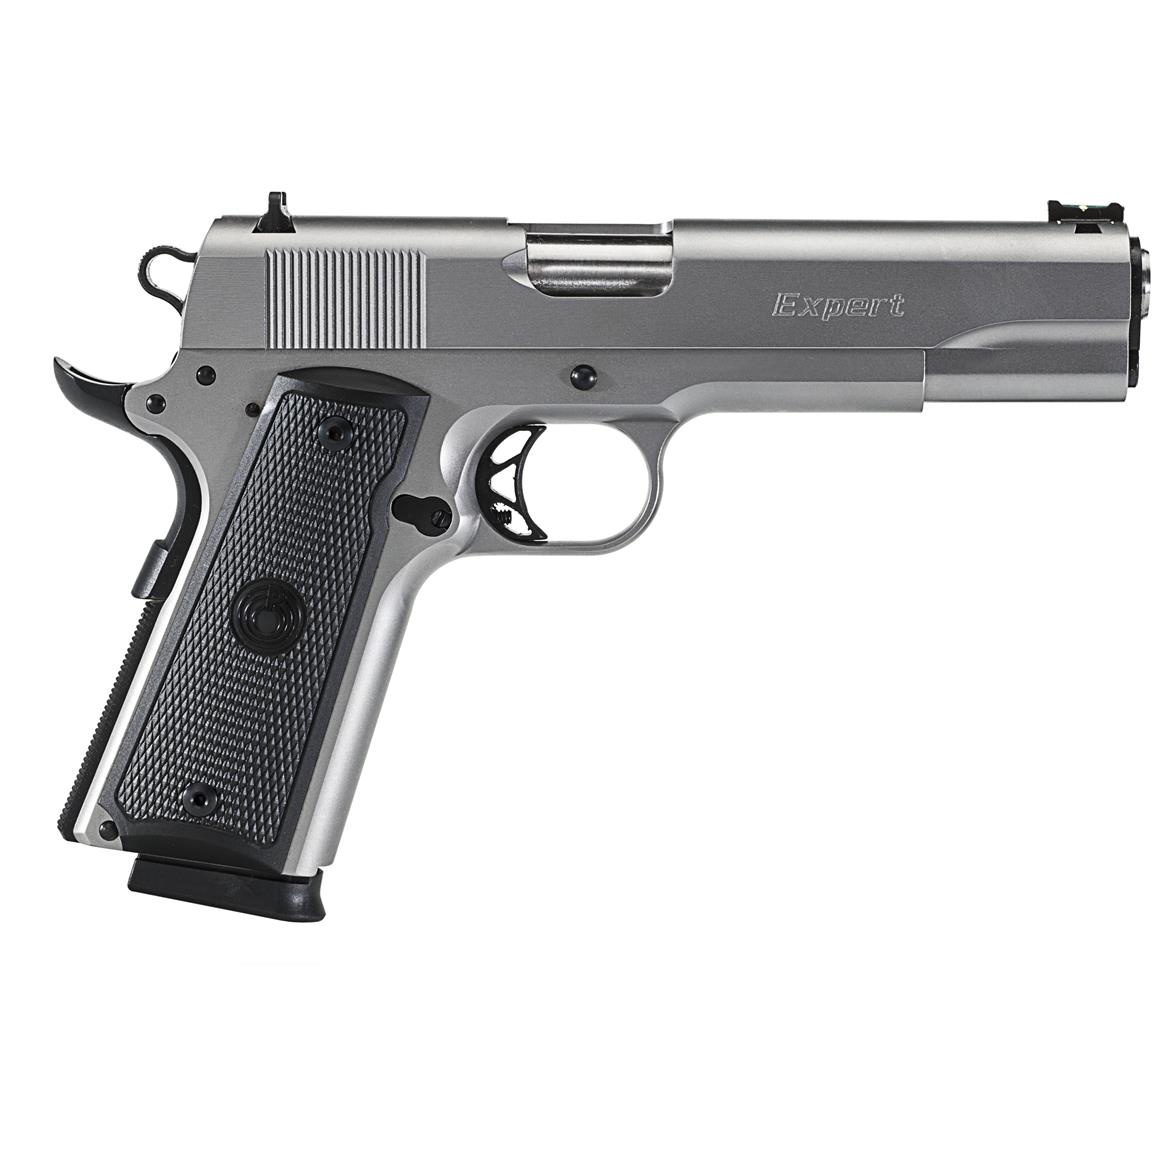 PARA USA Expert Stainless Steel 1911 Pistol, Semi-automatic, .45 ACP, 5 Stainless Steel 1911 45 Acp